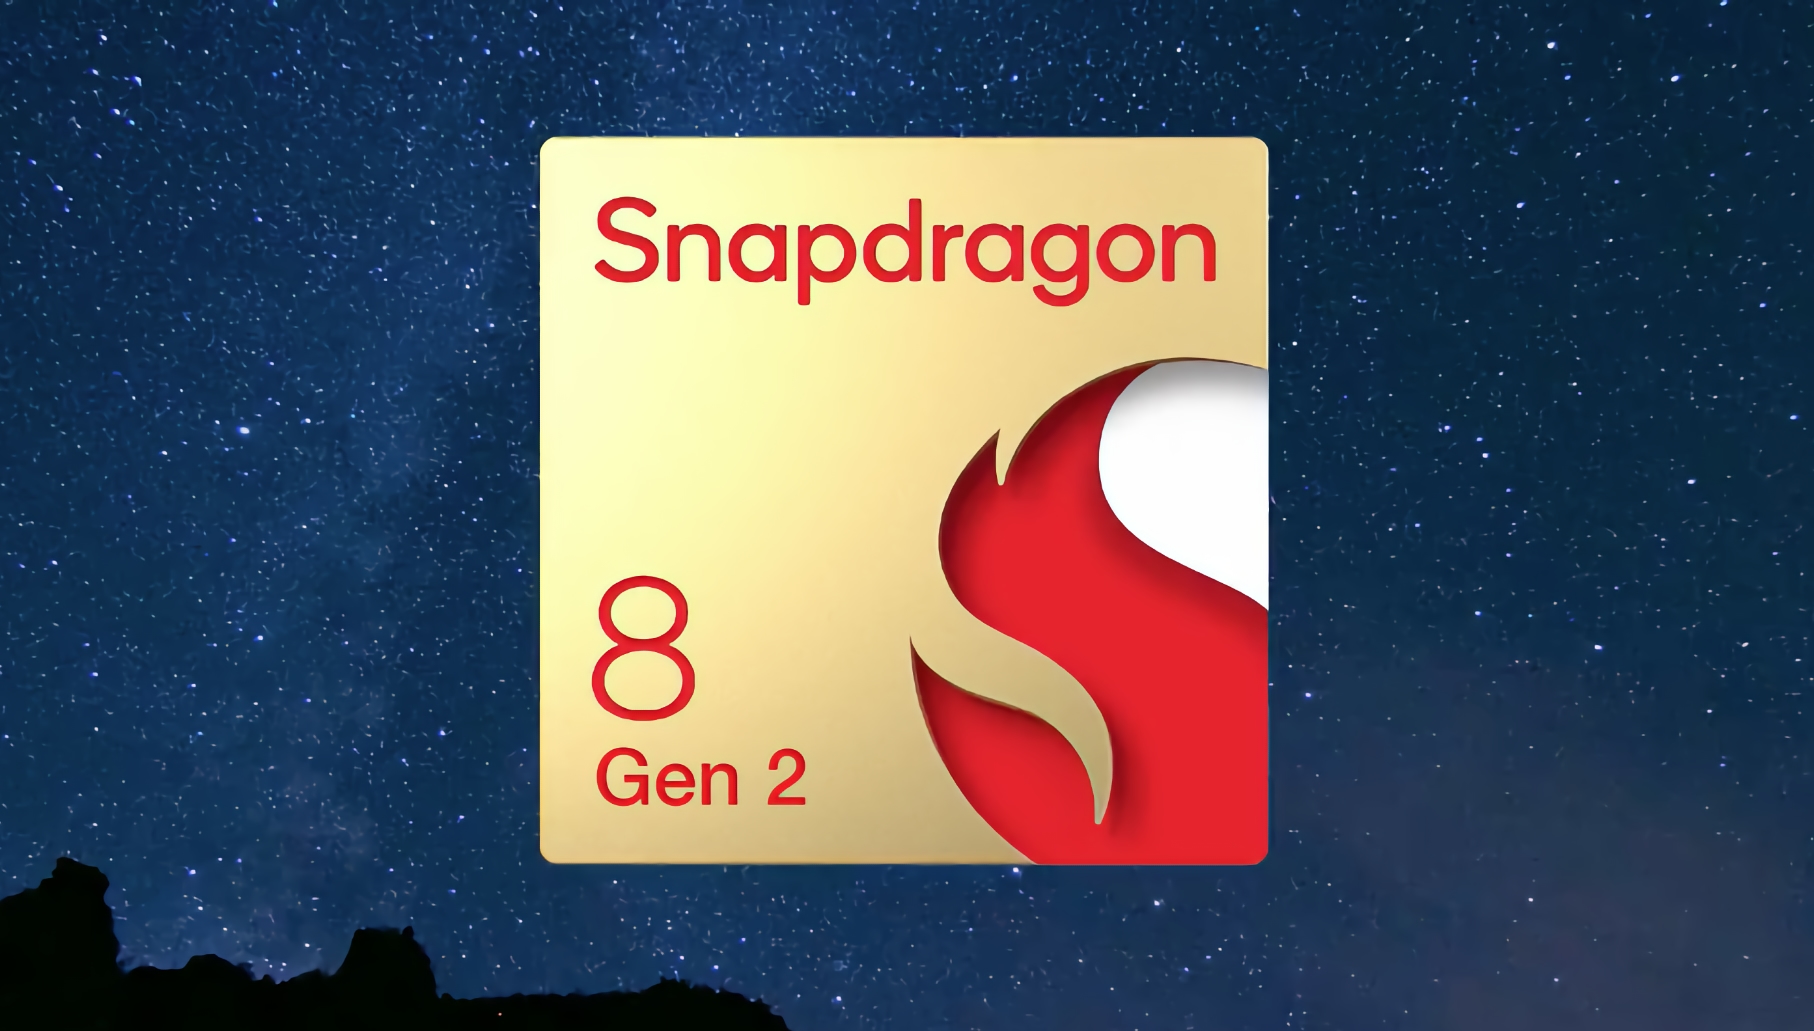 Specifications of Snapdragon 8 Gen 2 chip appeared: 4-nanometer processor, more power and a new layout of cores